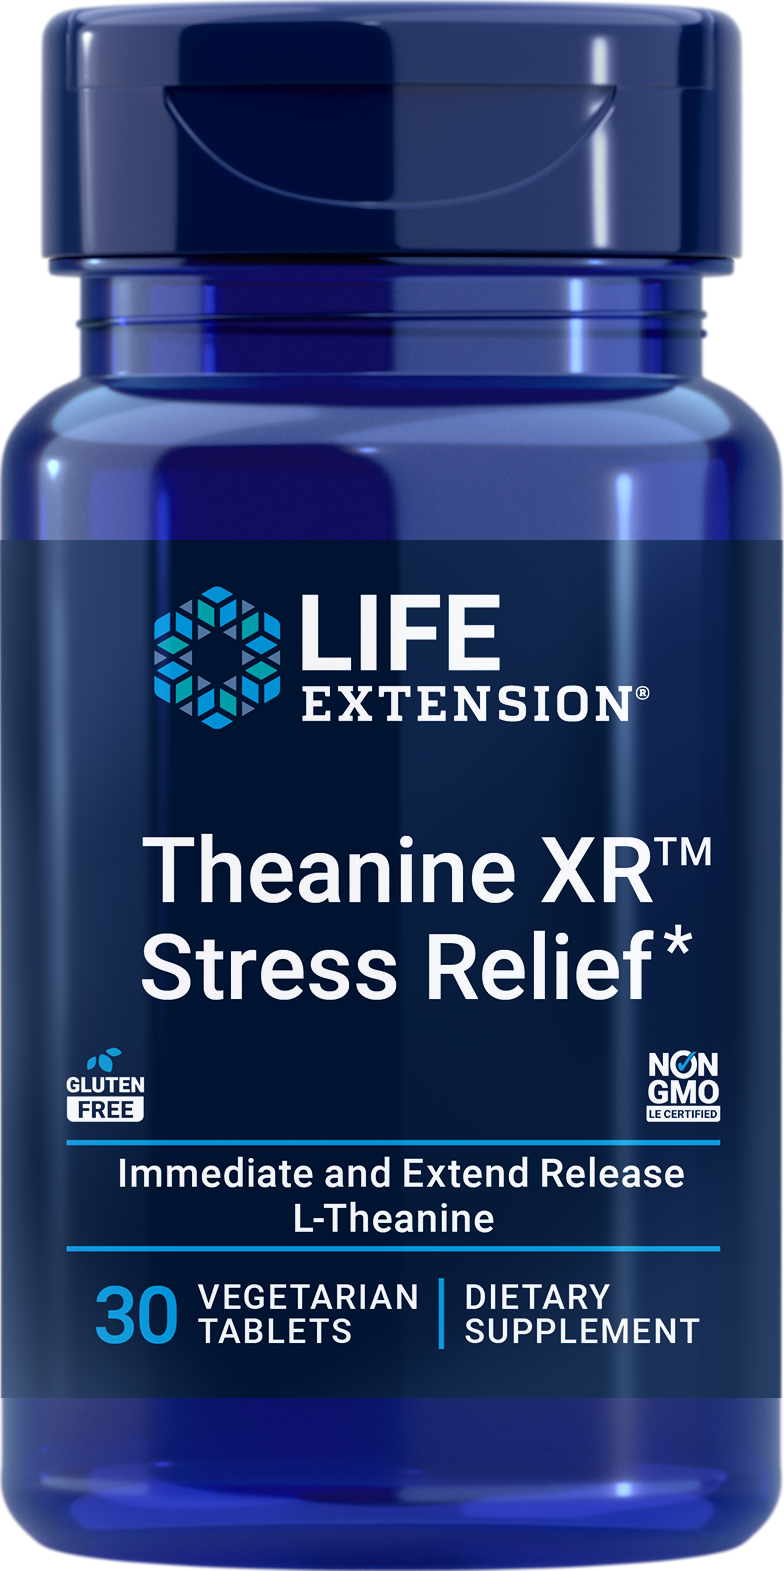 Theanine XR™ Stress Relief